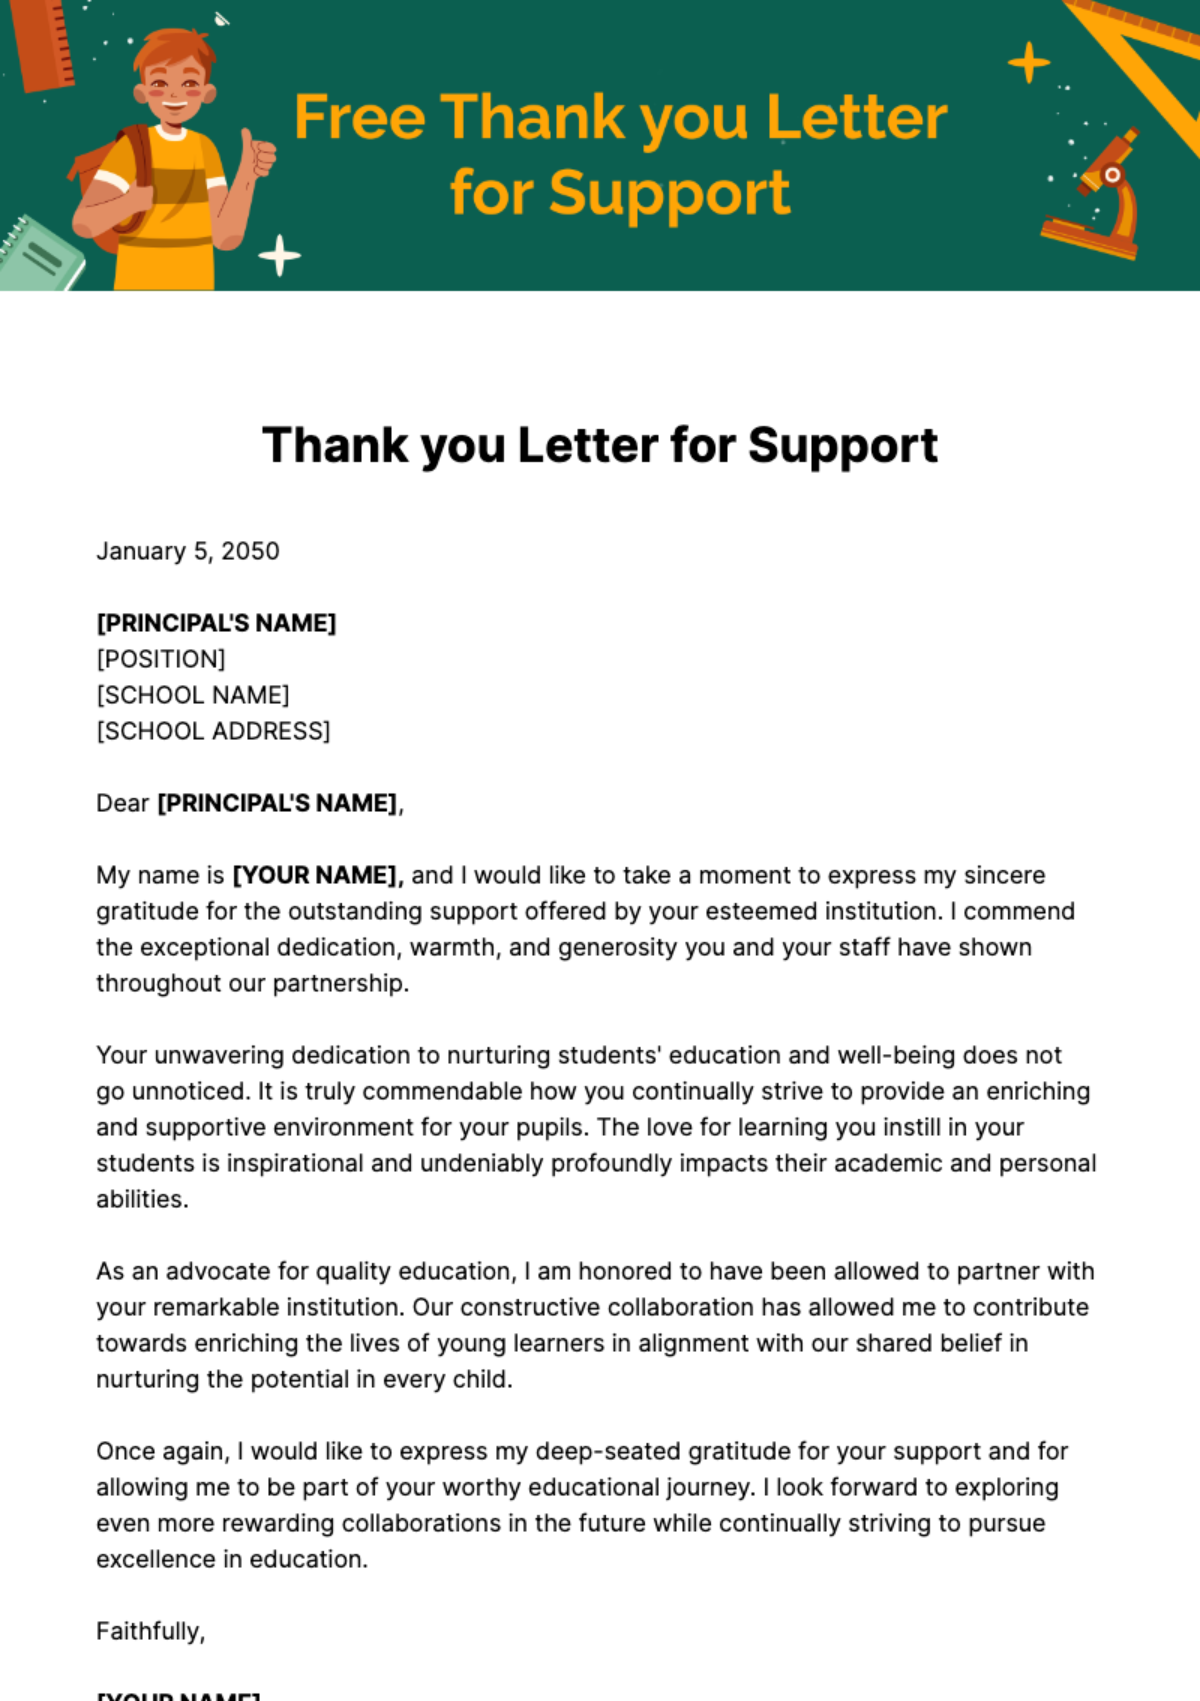 Free Thank you Letter for Support Template